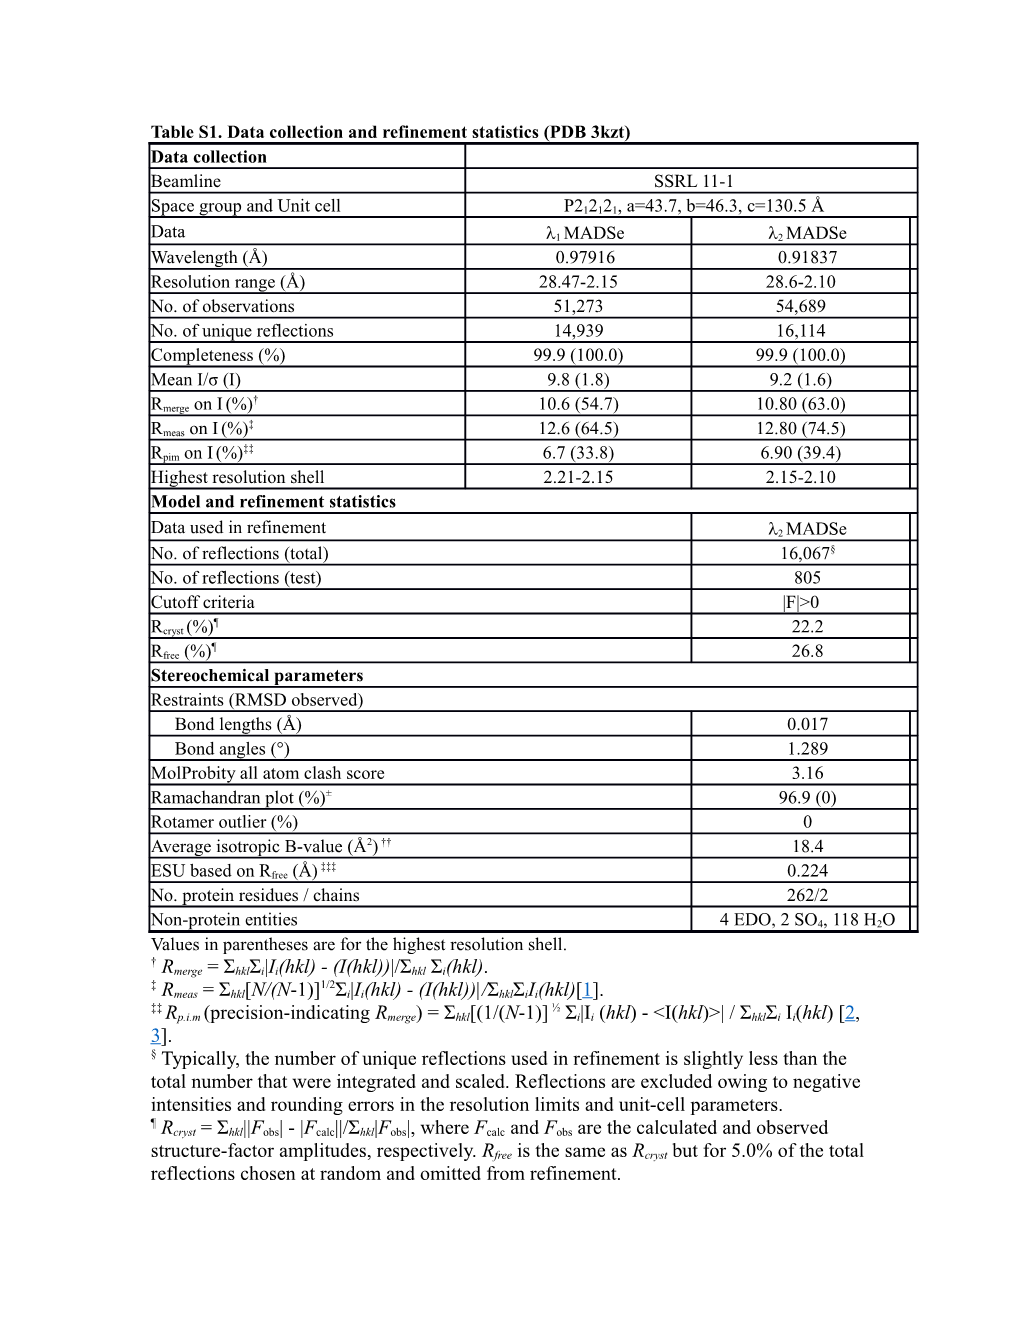 Table S1. Data Collection and Refinement Statistics (PDB 3Kzt)